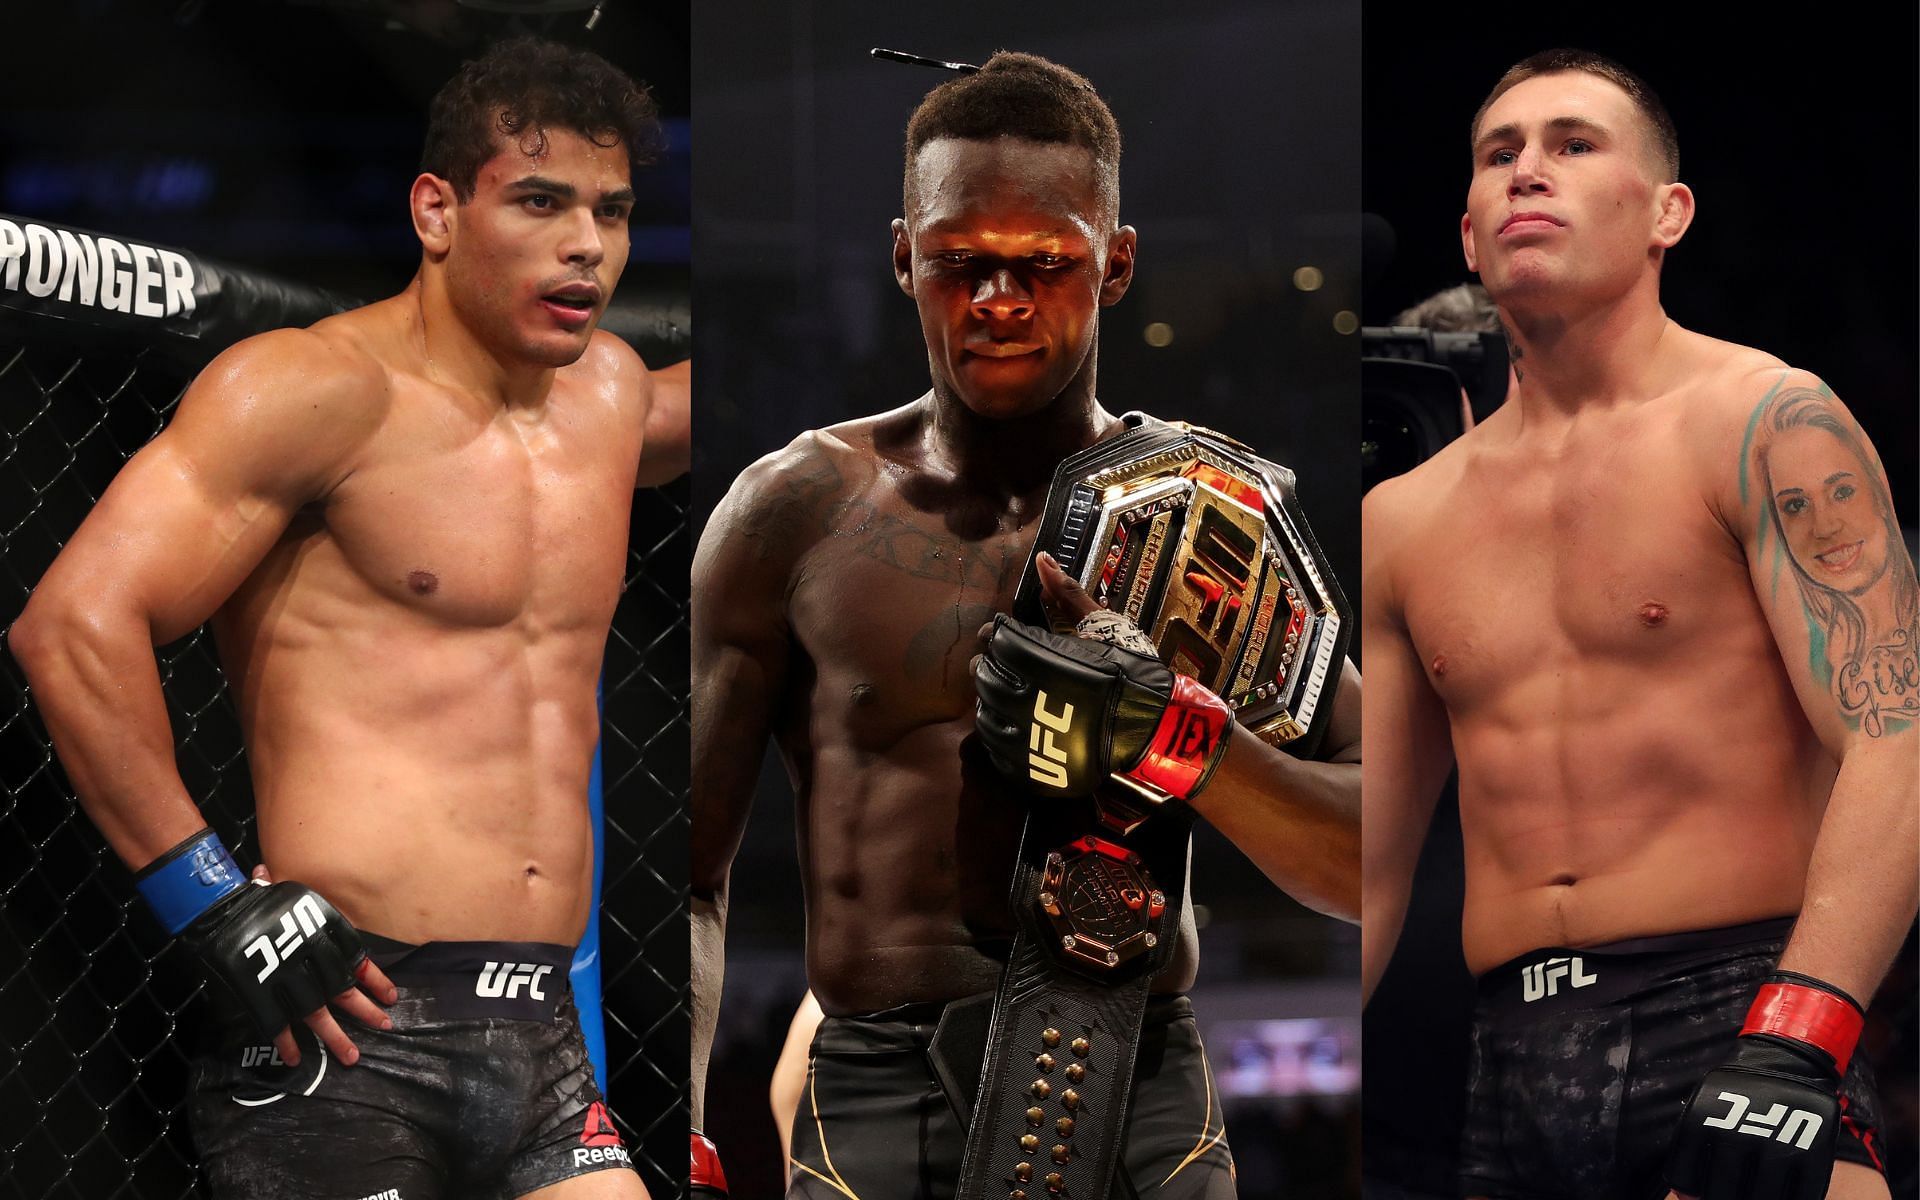 Paulo Costa (left), Israel Adesanya (center), and Darren Till (right). [Image courtesy: all images via Getty Images]